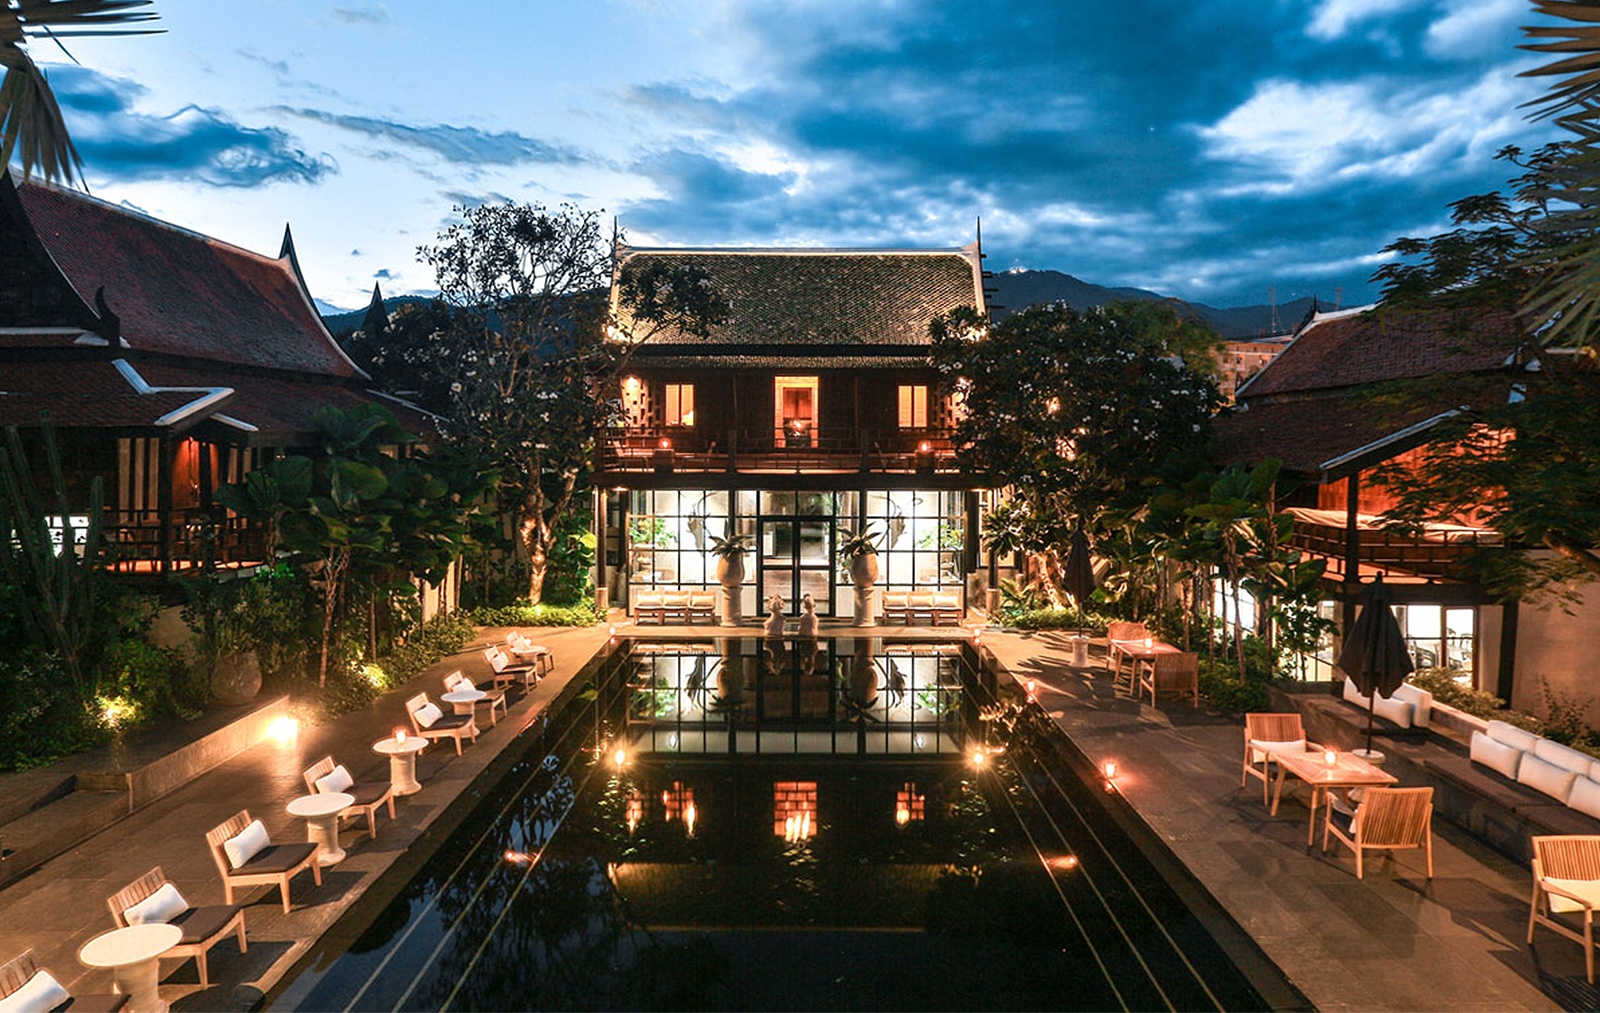 Villa Mahabhirom is one of the best Chiang Mai hotels in Thailand